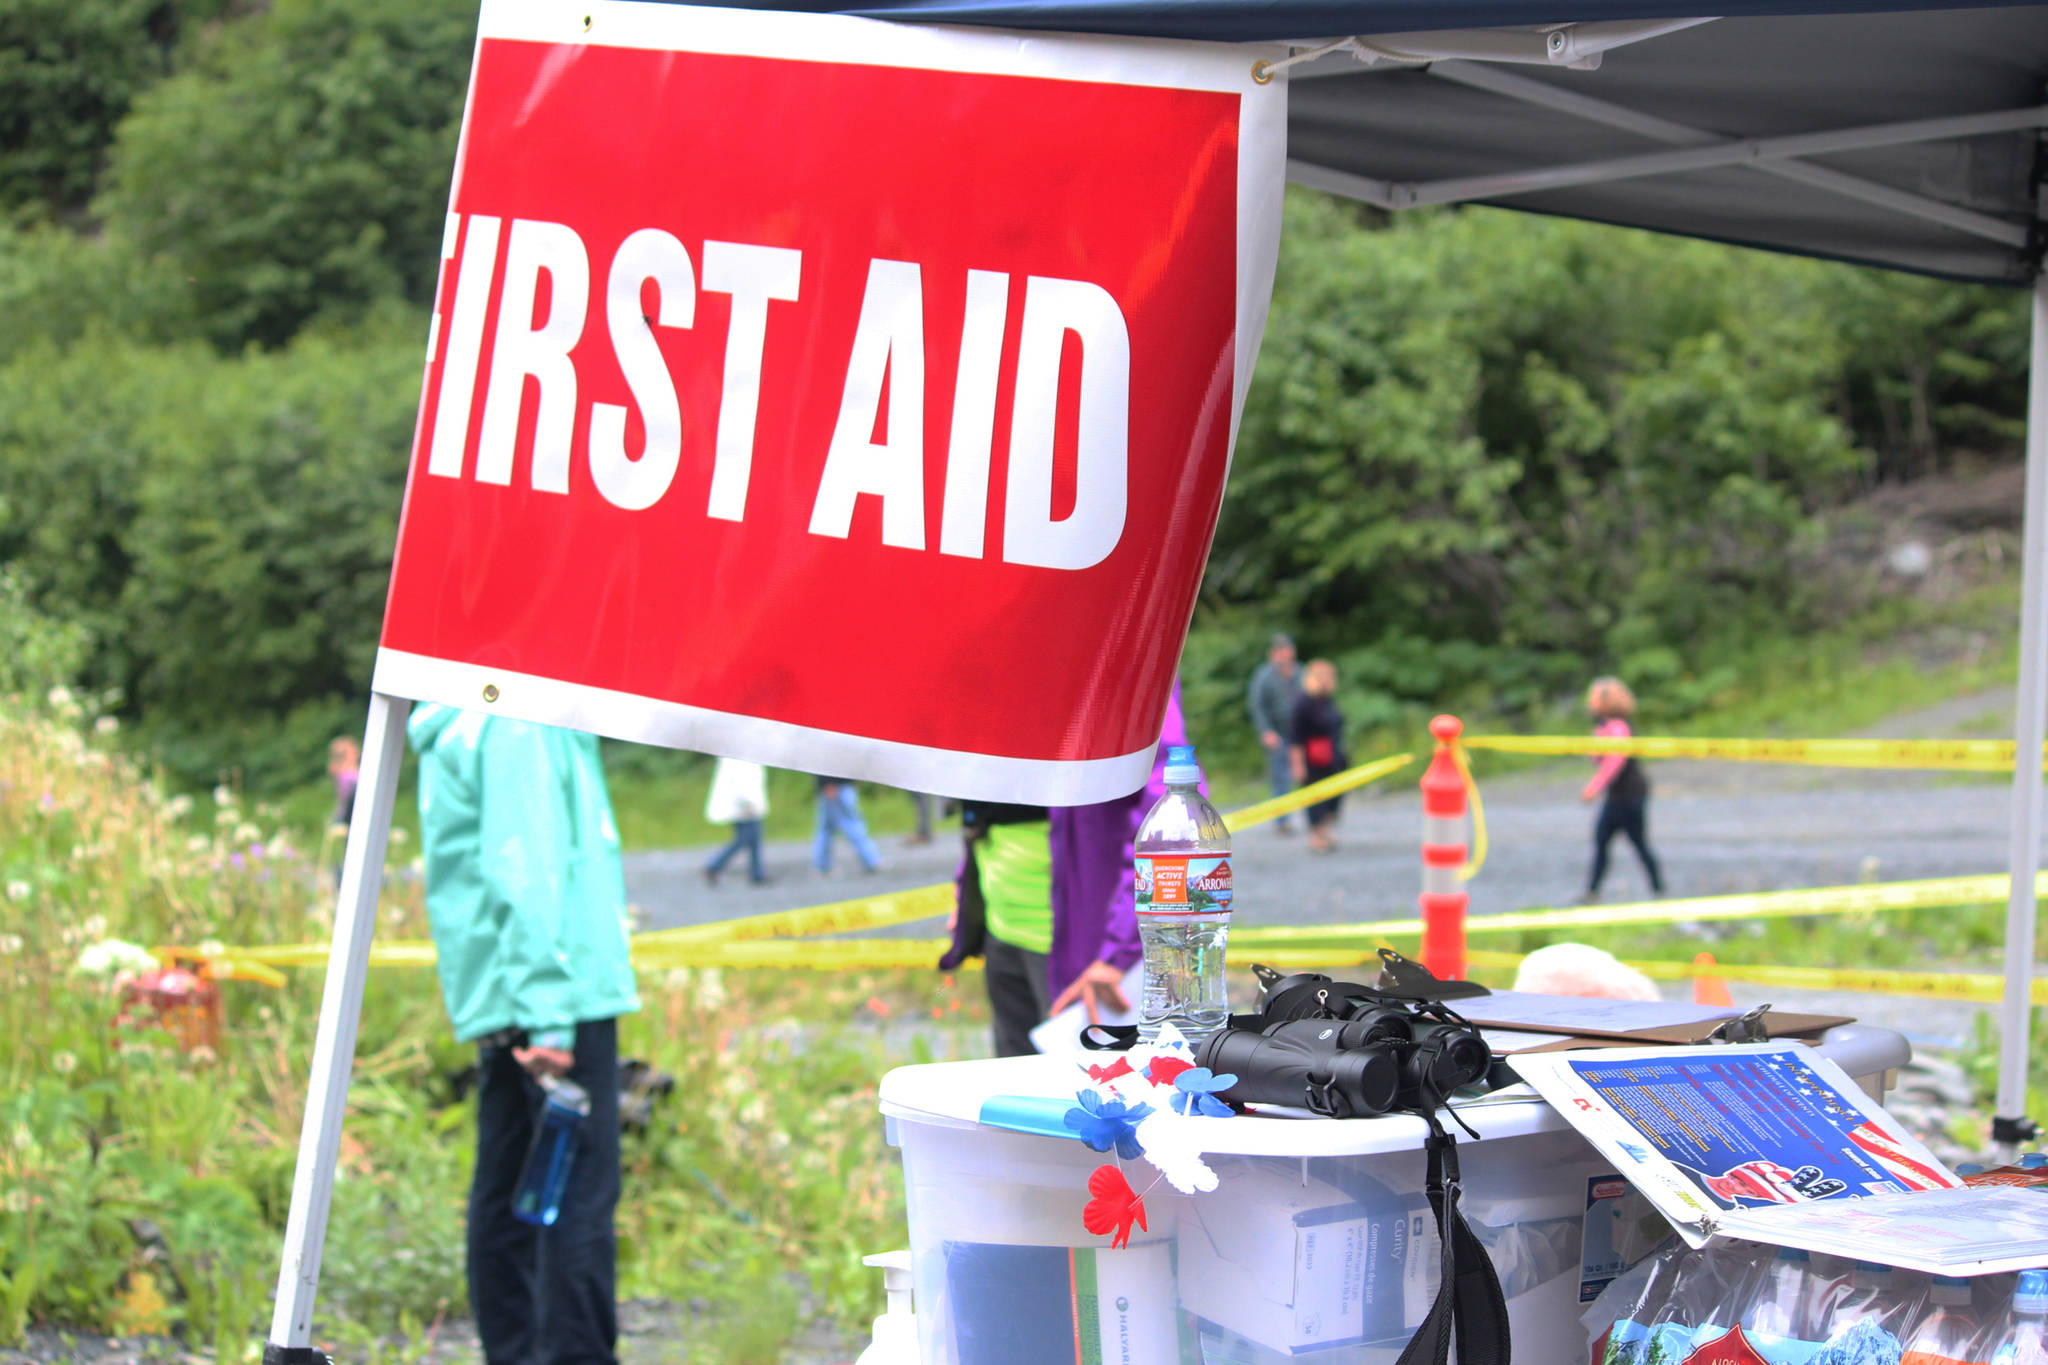 Supplies and some Fourth of July accessories sit ready and waiting in a first aid tent at the base of Mount Marathon during the annual Mount Marathon Race on Tuesday, July 4, 2017 in Seward, Alaska. For the last four years, there has been a more official effort to provide first aid to runners on the mountain and at its base. (Photo by Megan Pacer/Peninsula Clarion)